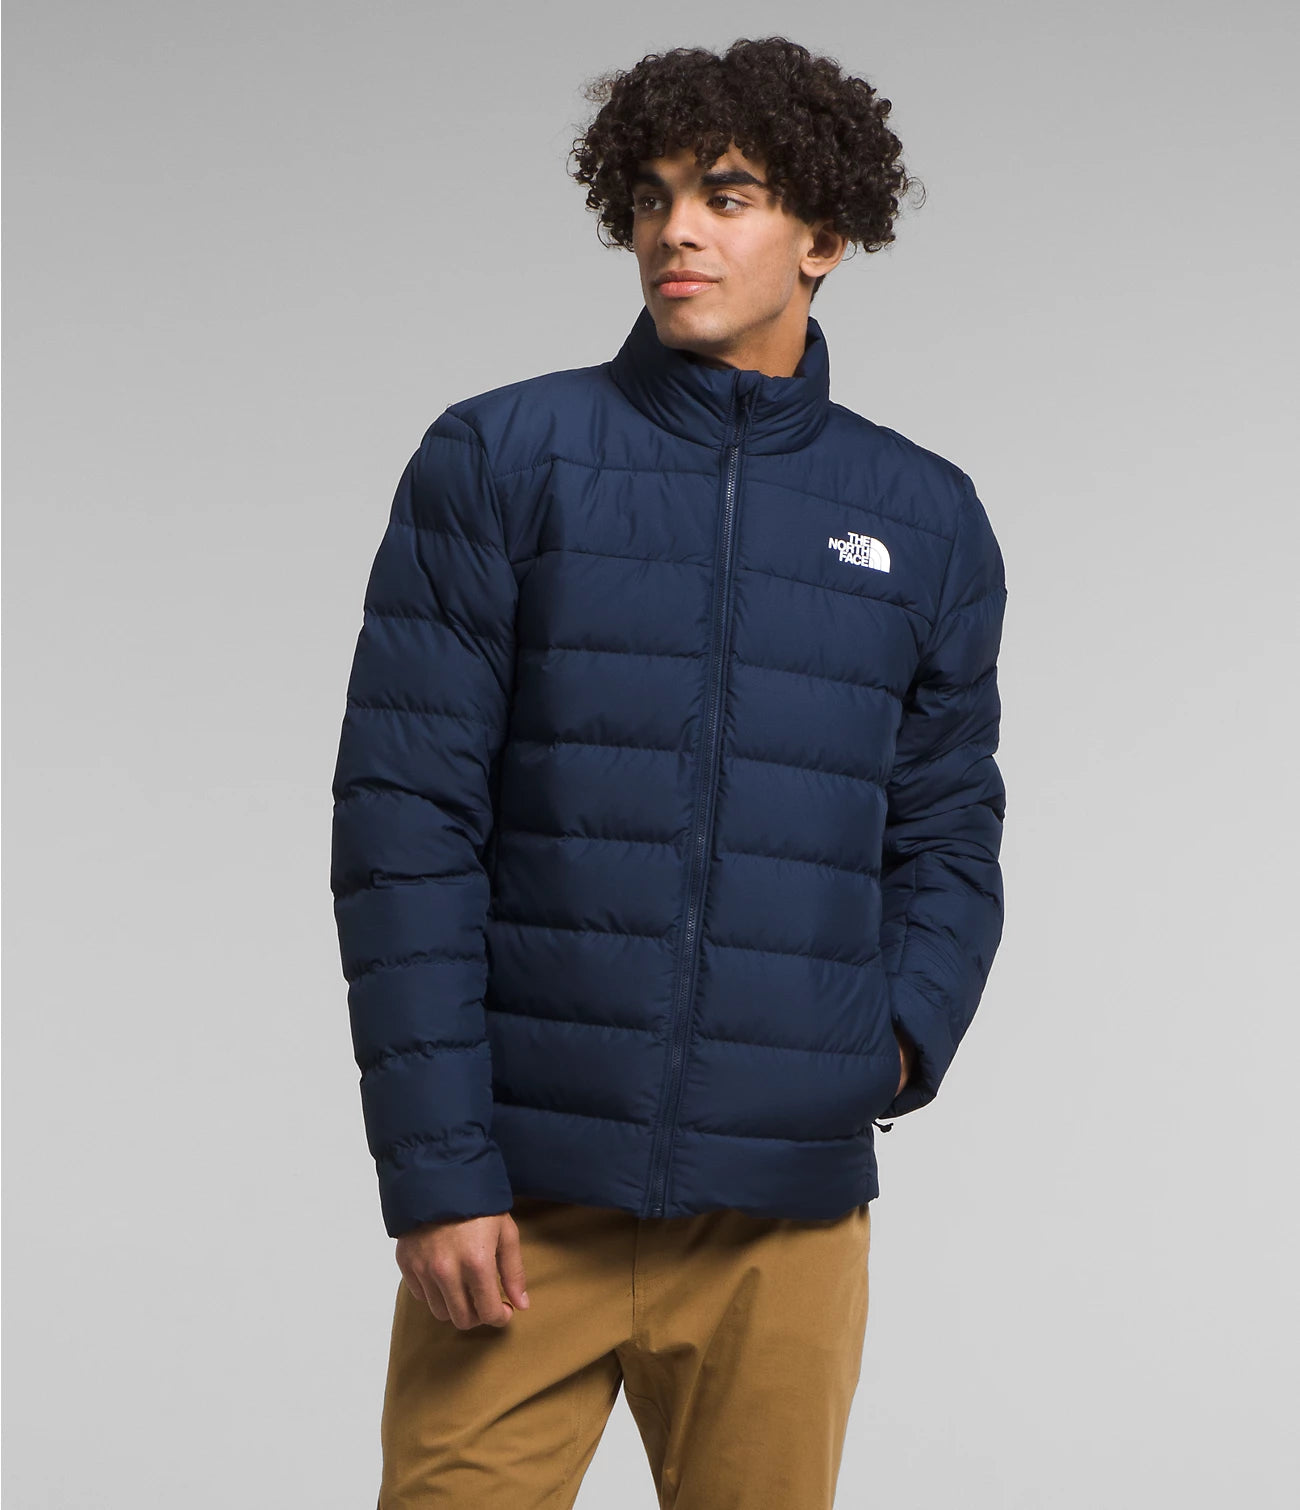 THE NORTH FACE Men's Jackets SUMMIT NAVY / M North Face Men’s Aconcagua 3 Jacket || David's Clothing NF0A84HZ8K2